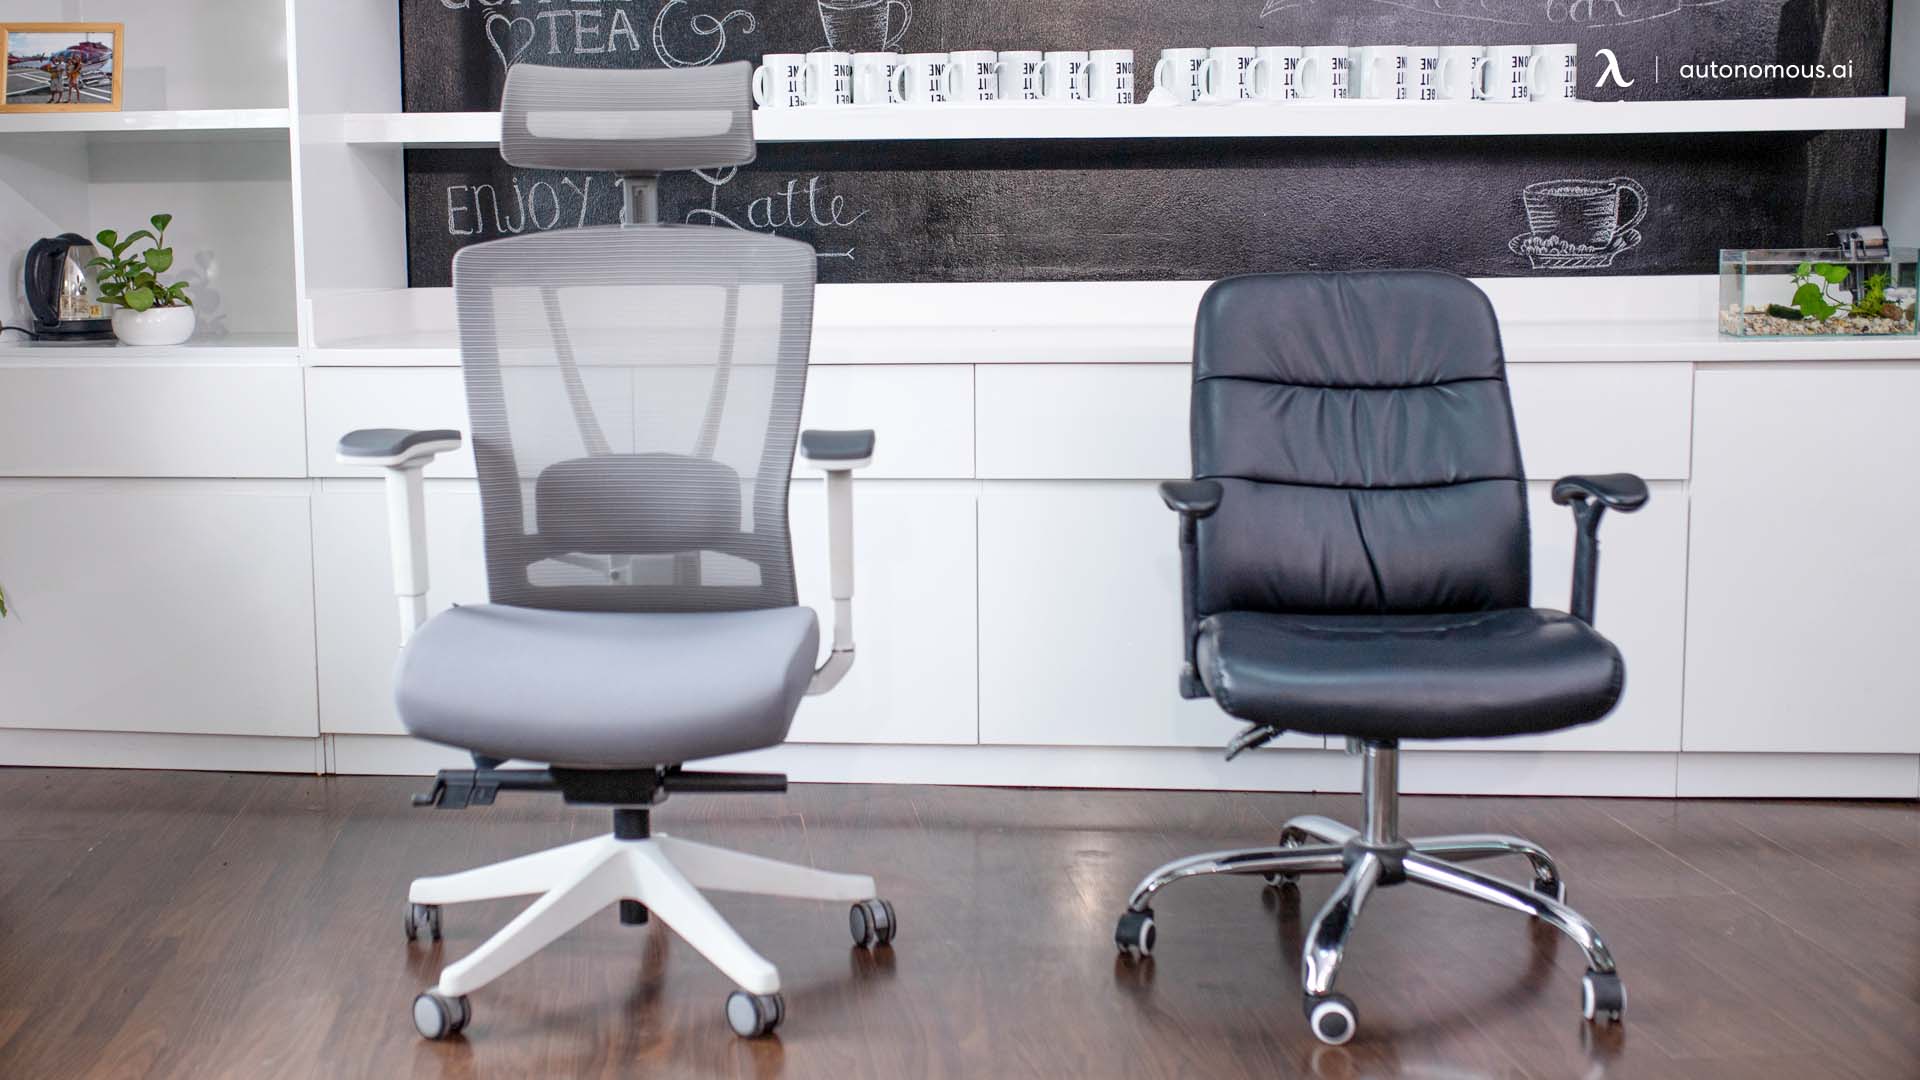 What Makes An Office Chair Ergonomic?